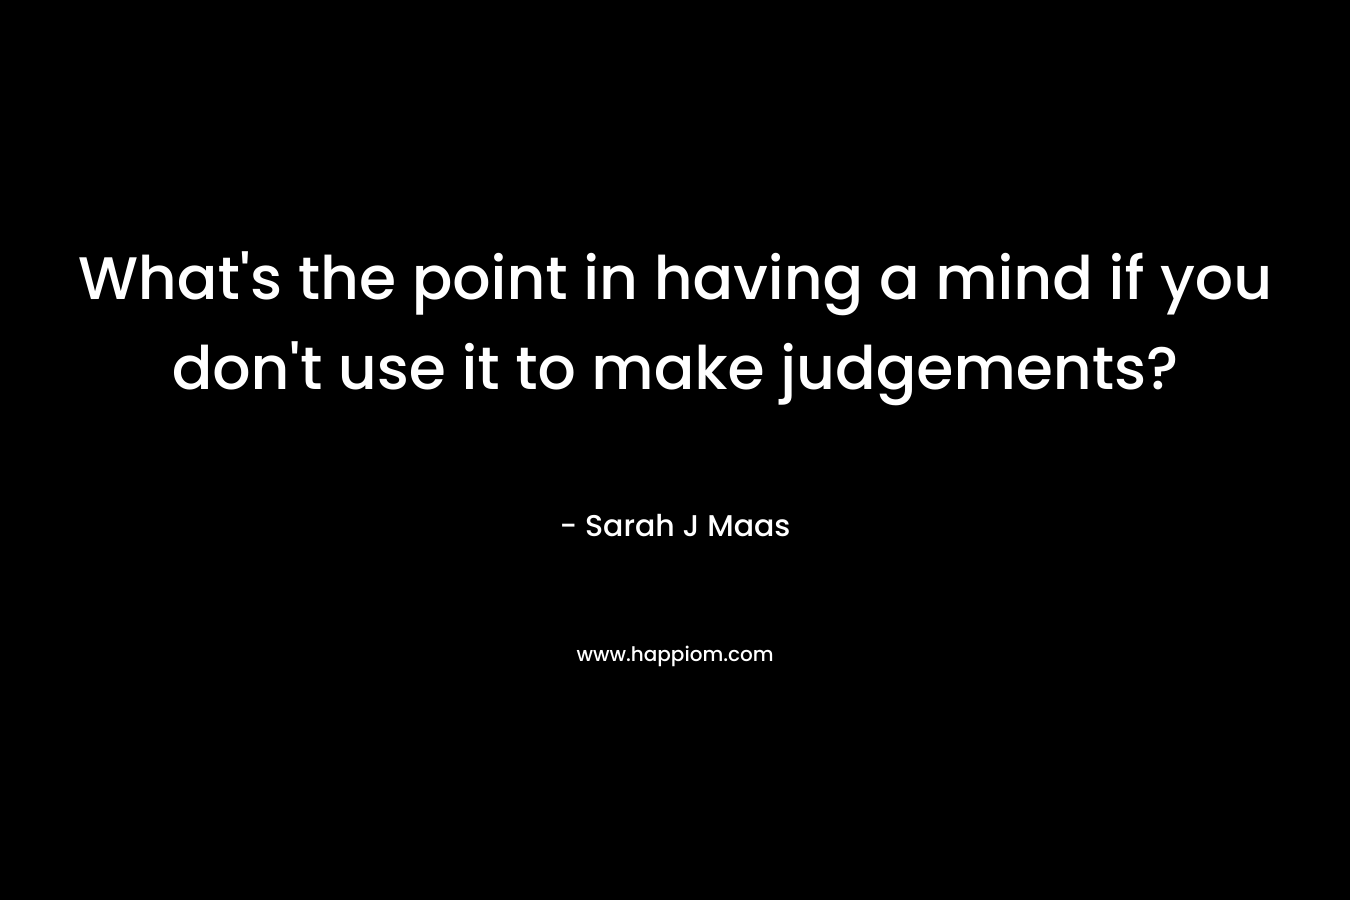 What's the point in having a mind if you don't use it to make judgements?